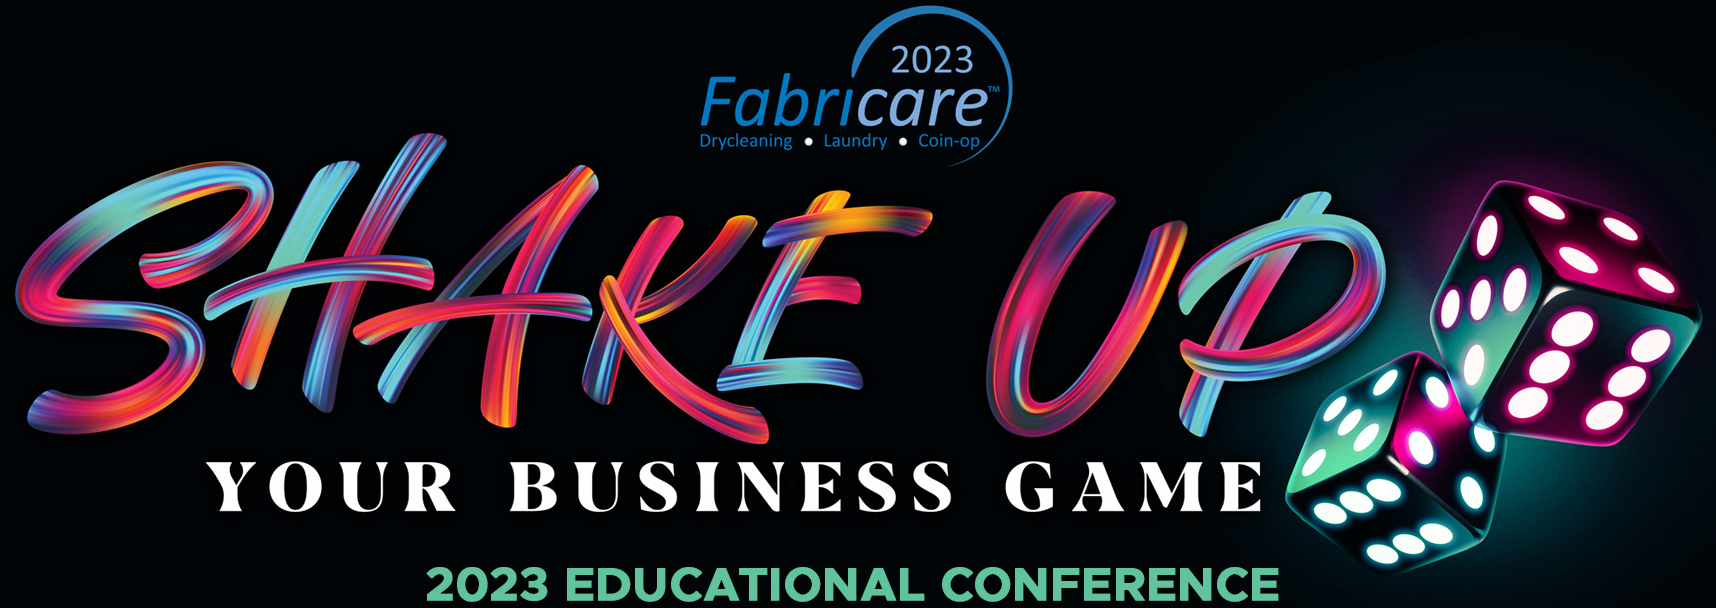 Fabricare 2023: Your Business Game